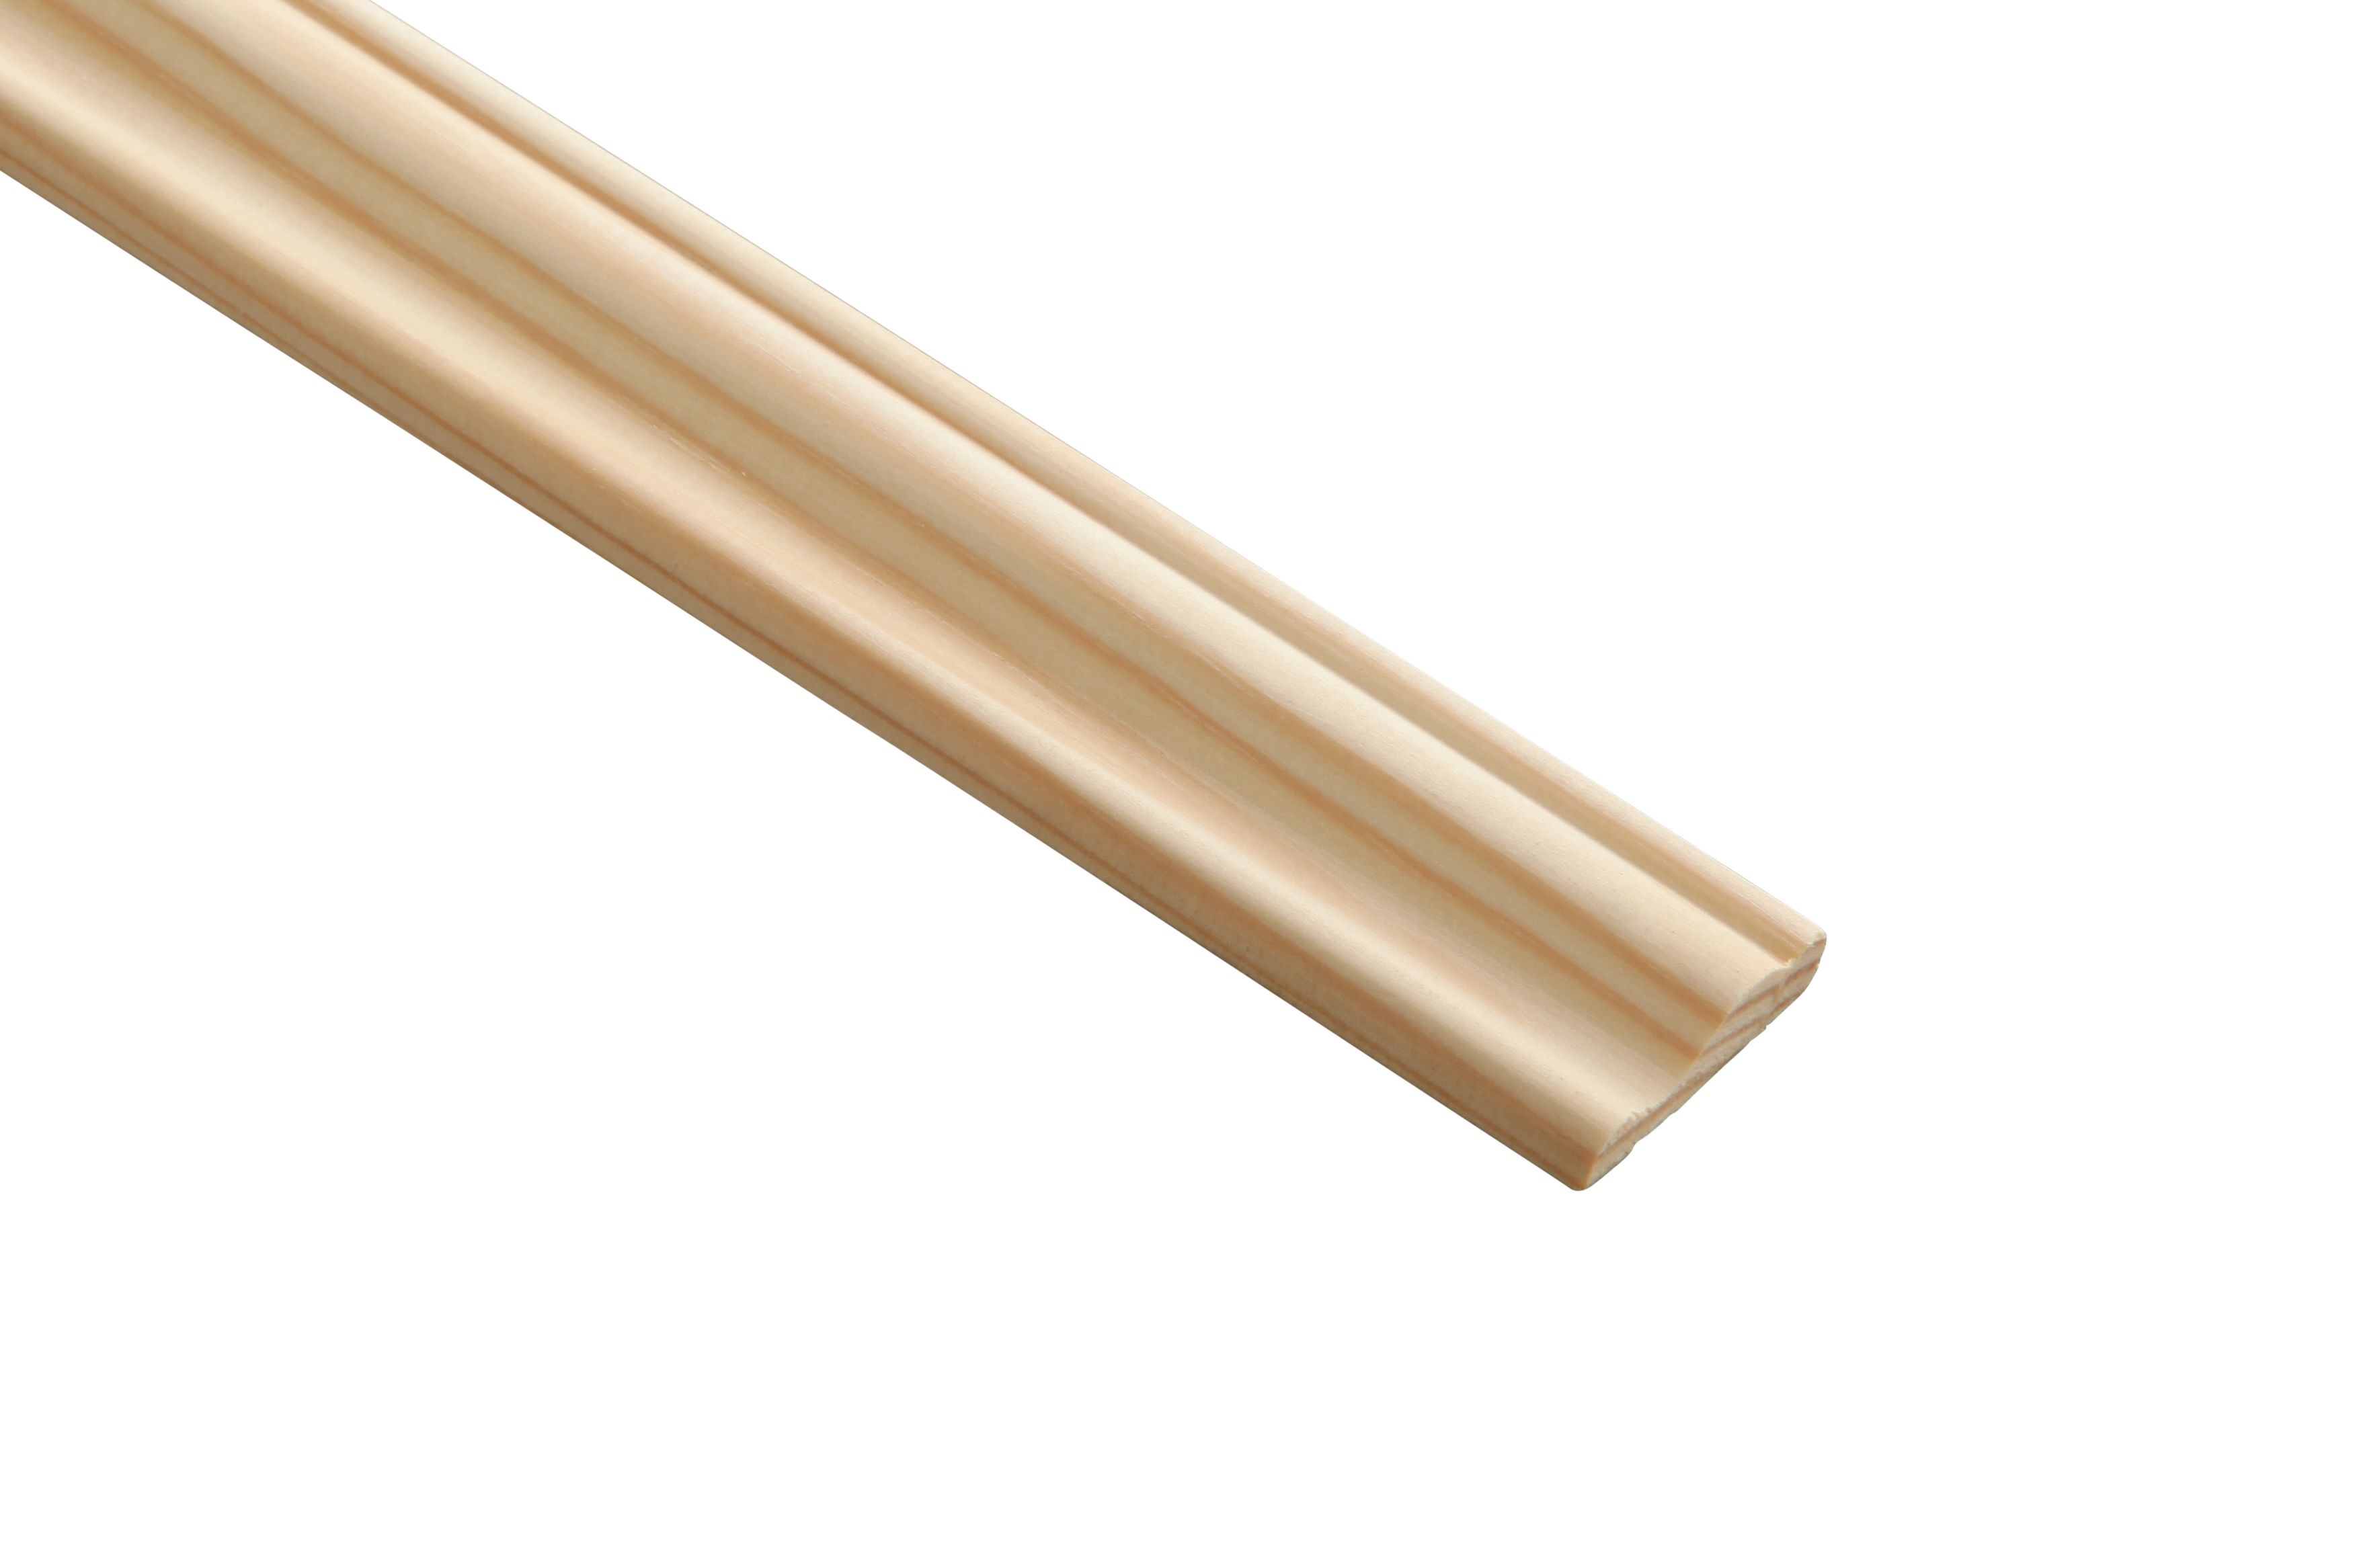 Image of Wickes Pine 3 Rise Panel Moulding - 28 x 9 x 2400mm